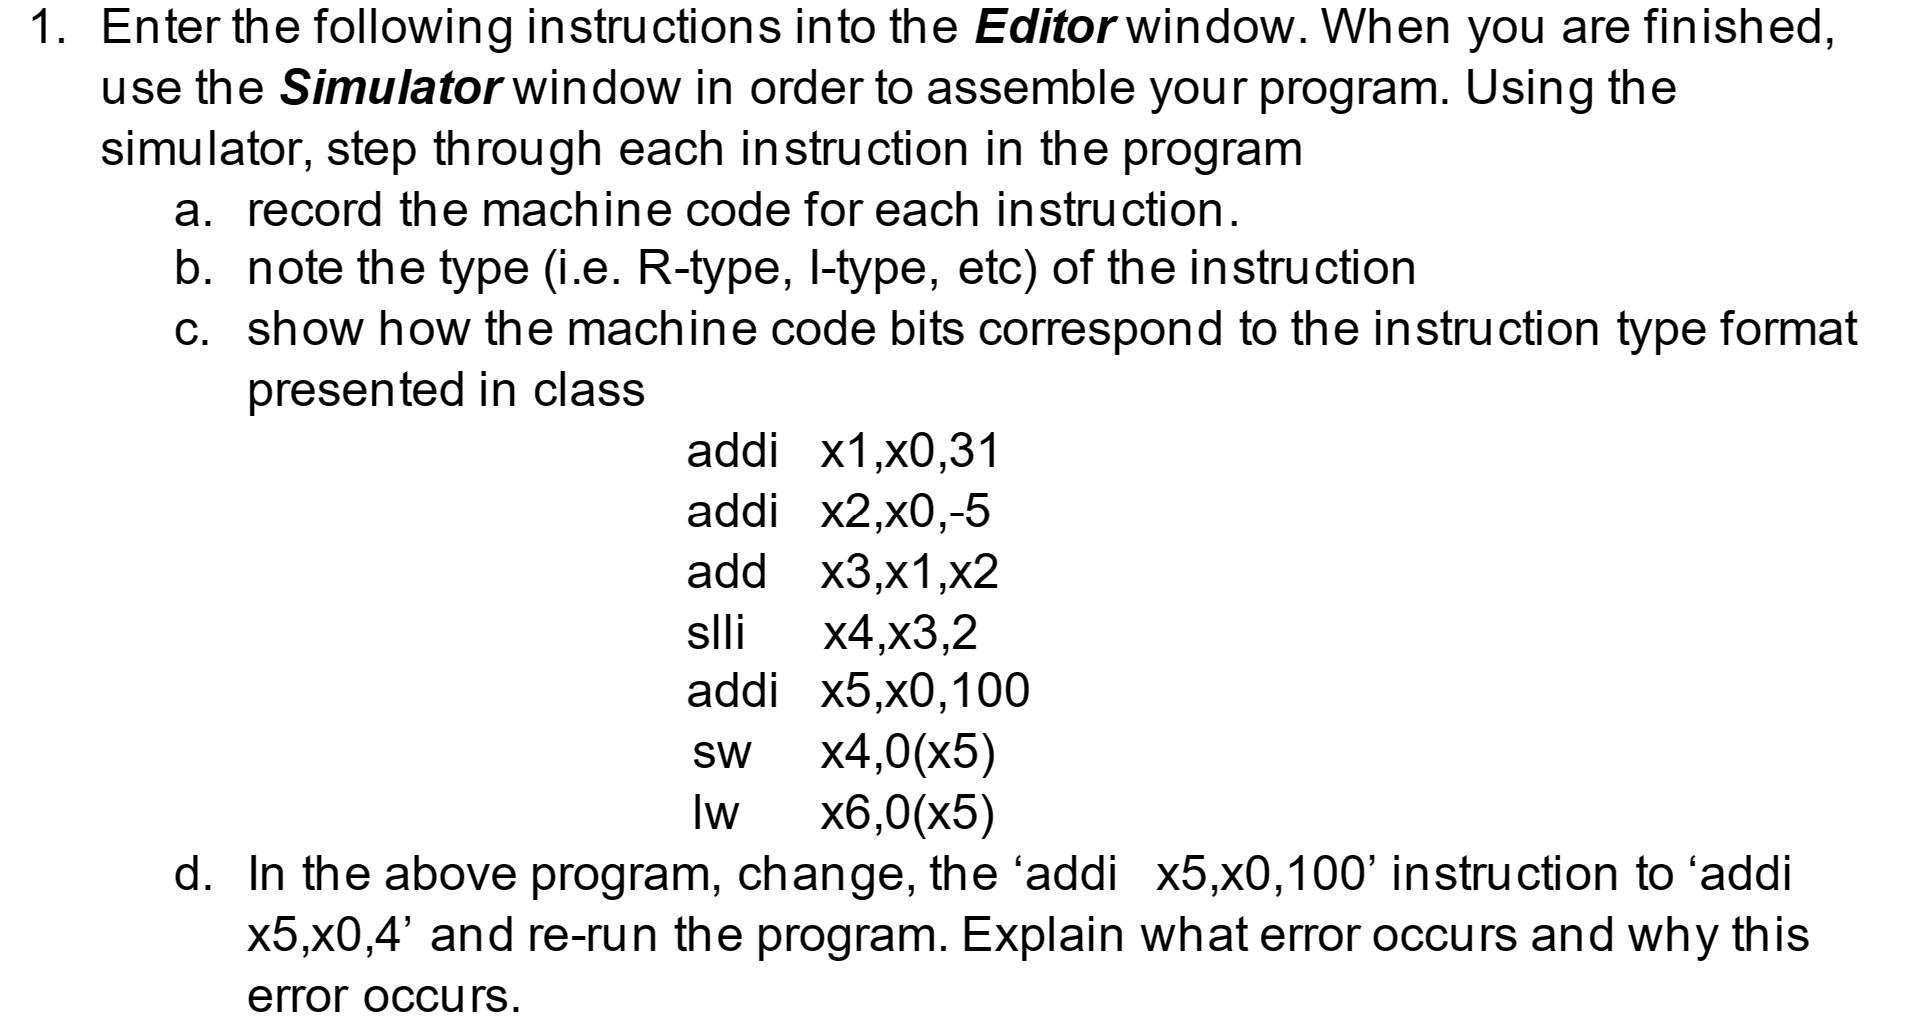 1. Enter the following instructions into the Editor window. When you are finished, use the Simulator window